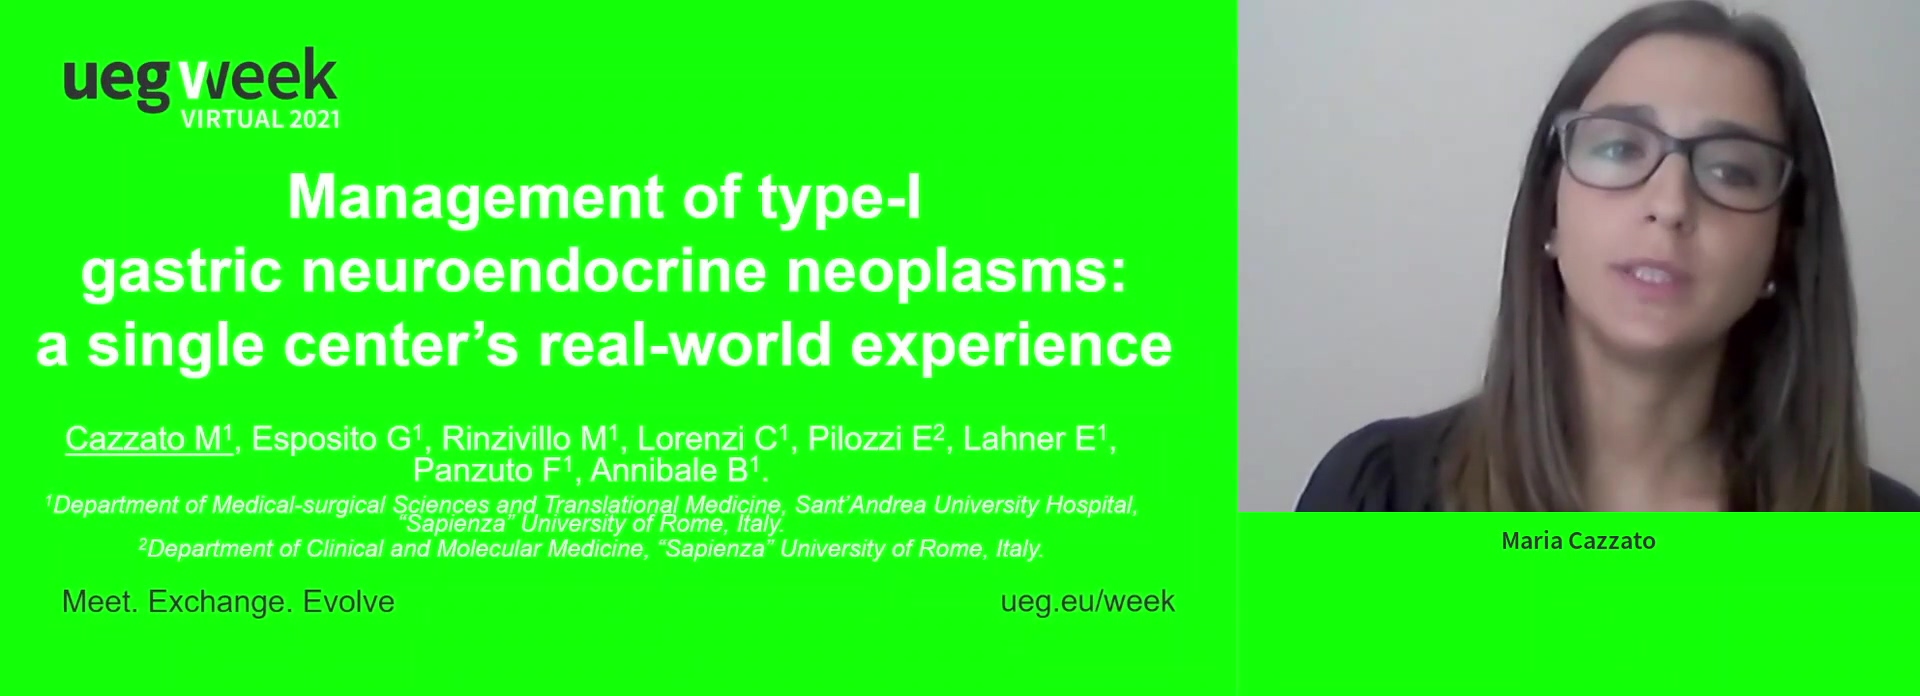 MANAGEMENT OF TYPE-I GASTRIC NEUROENDOCRINE NEOPLASMS: A SINGLE CENTER’S REAL WORLD EXPERIENCE